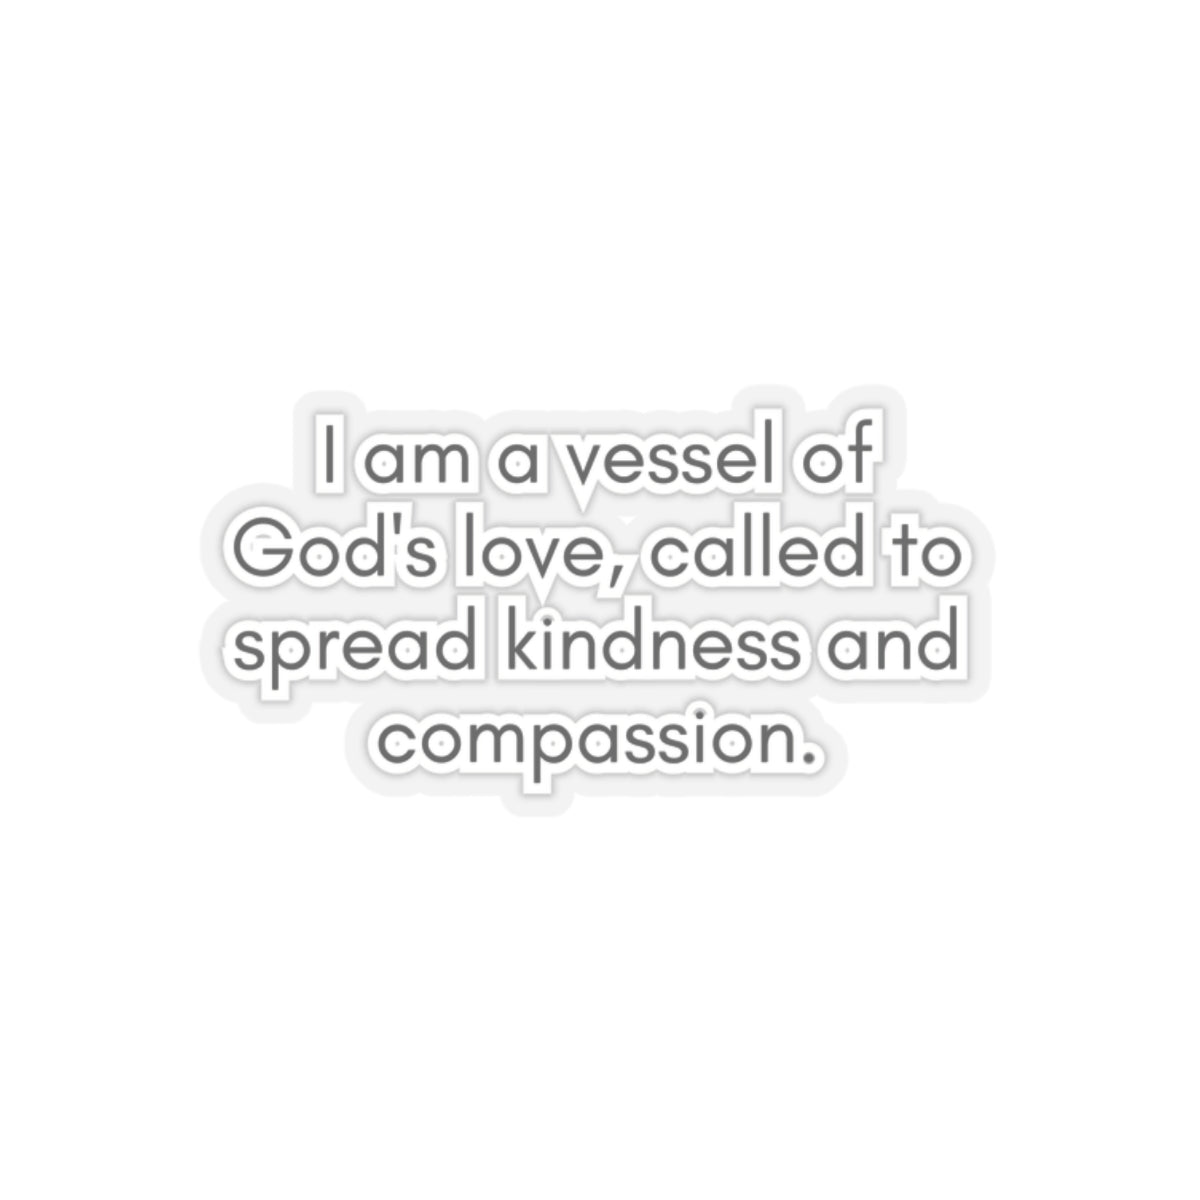 I Am A Vessel Of God's Love... Inspirational Quote Kiss-Cut Stickers-Paper products-2" × 2"-Transparent-mysticalcherry